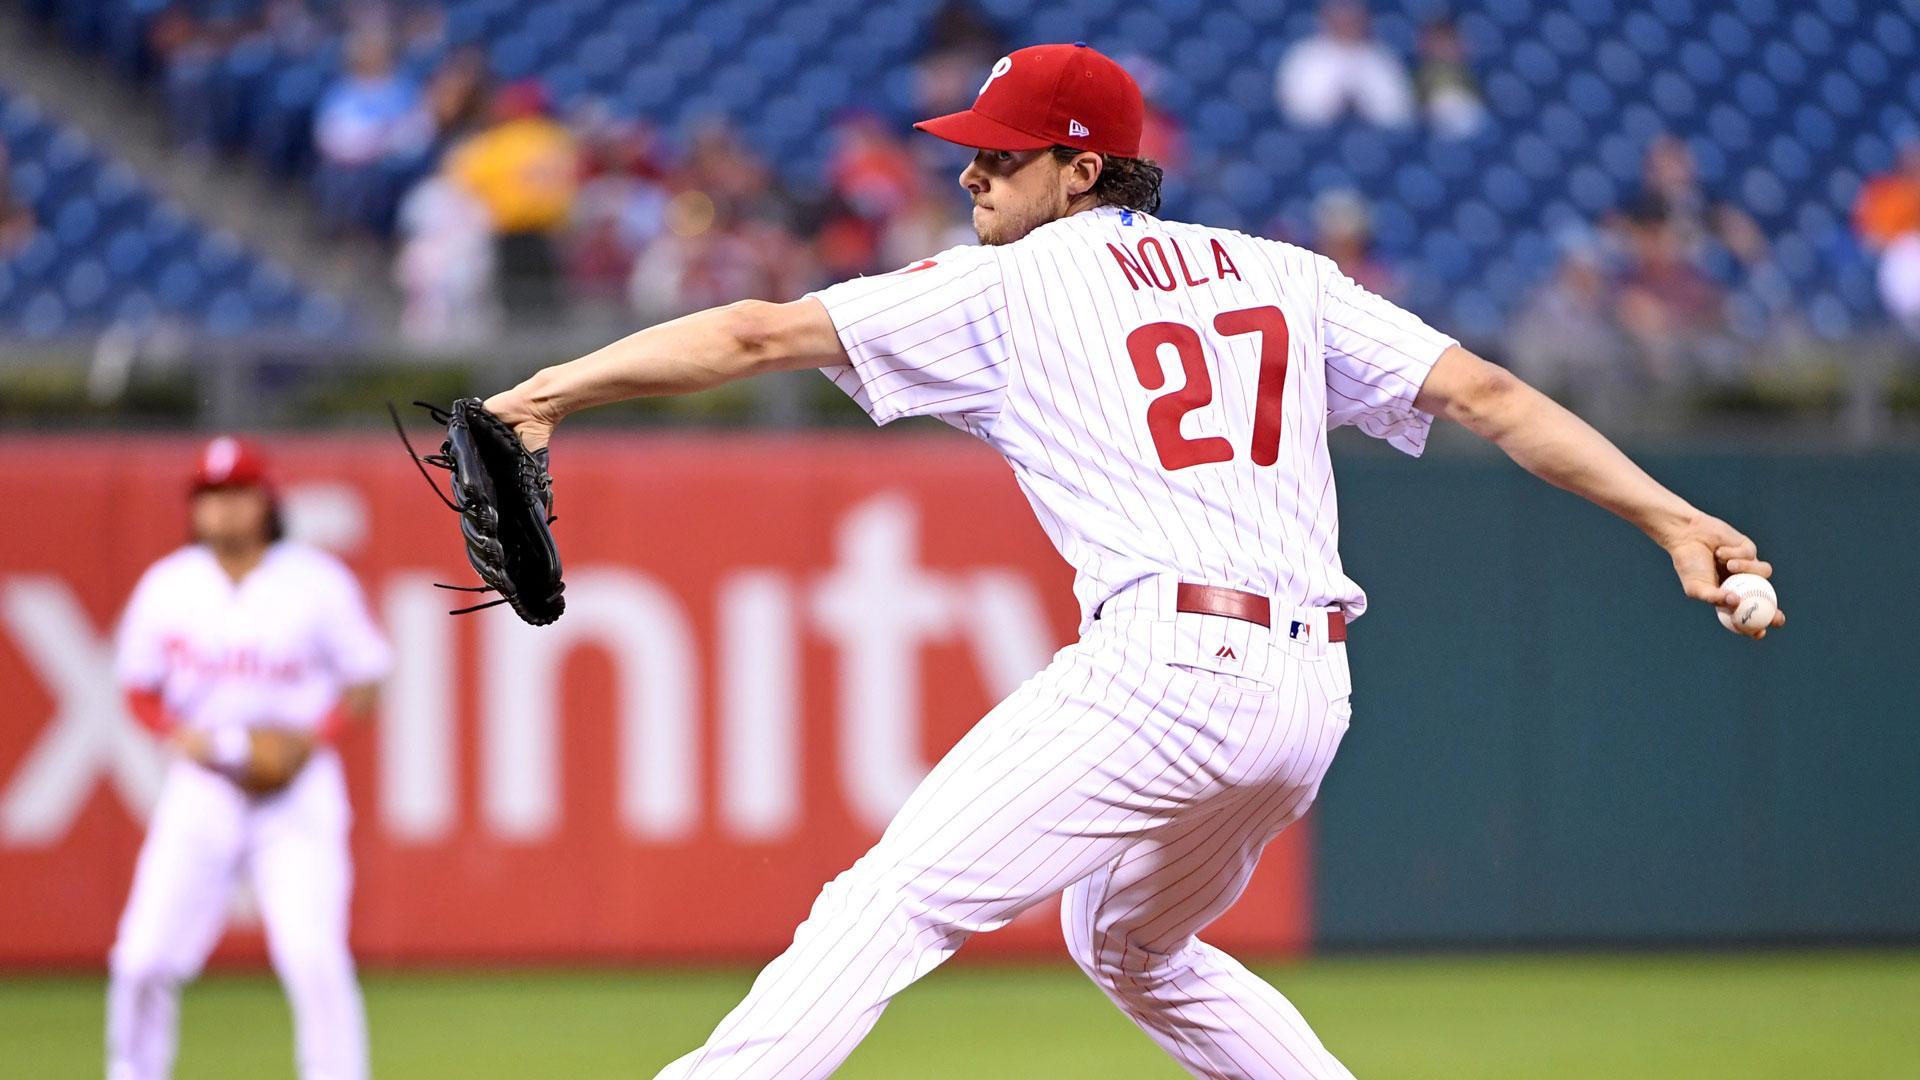 Ricky Bottalico: Aaron Nola made 'statement to the Marlins'. NBC